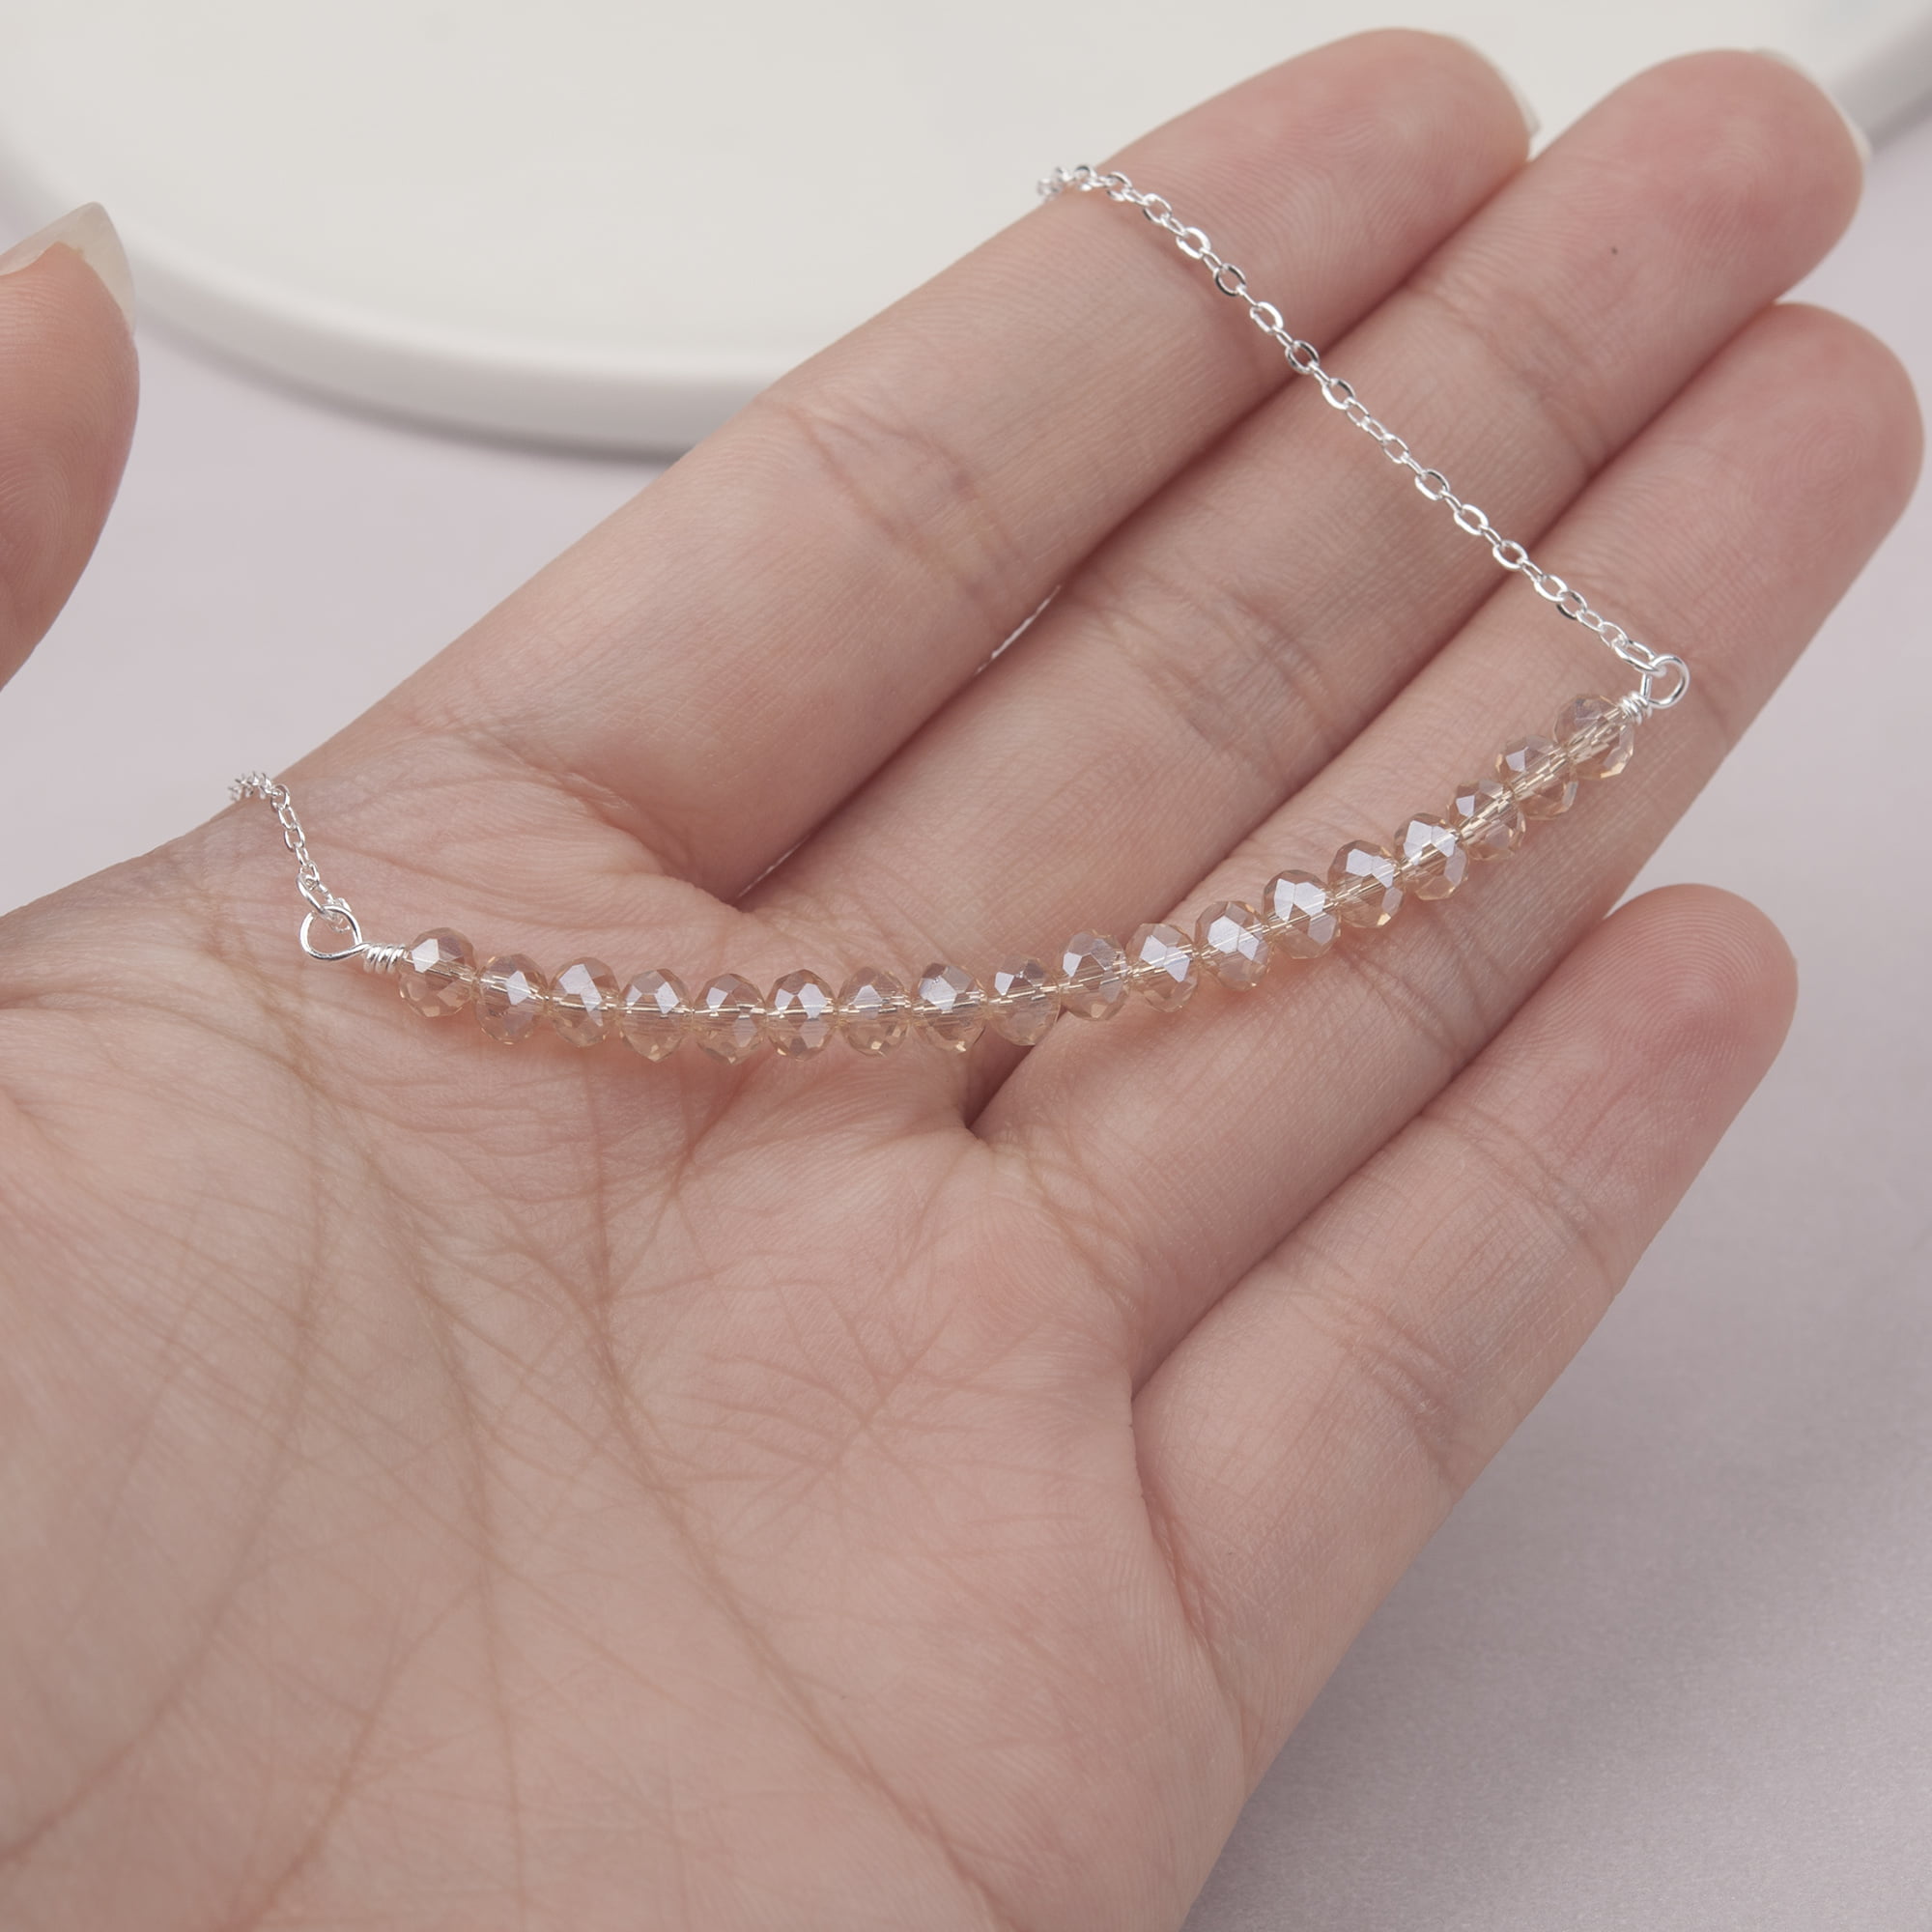 18th Birthday Gifts Necklace for Girls S925 Sterling Silver Necklace 18 Crystal Beads for 18 year old Girl Jewelry Gift for Her 